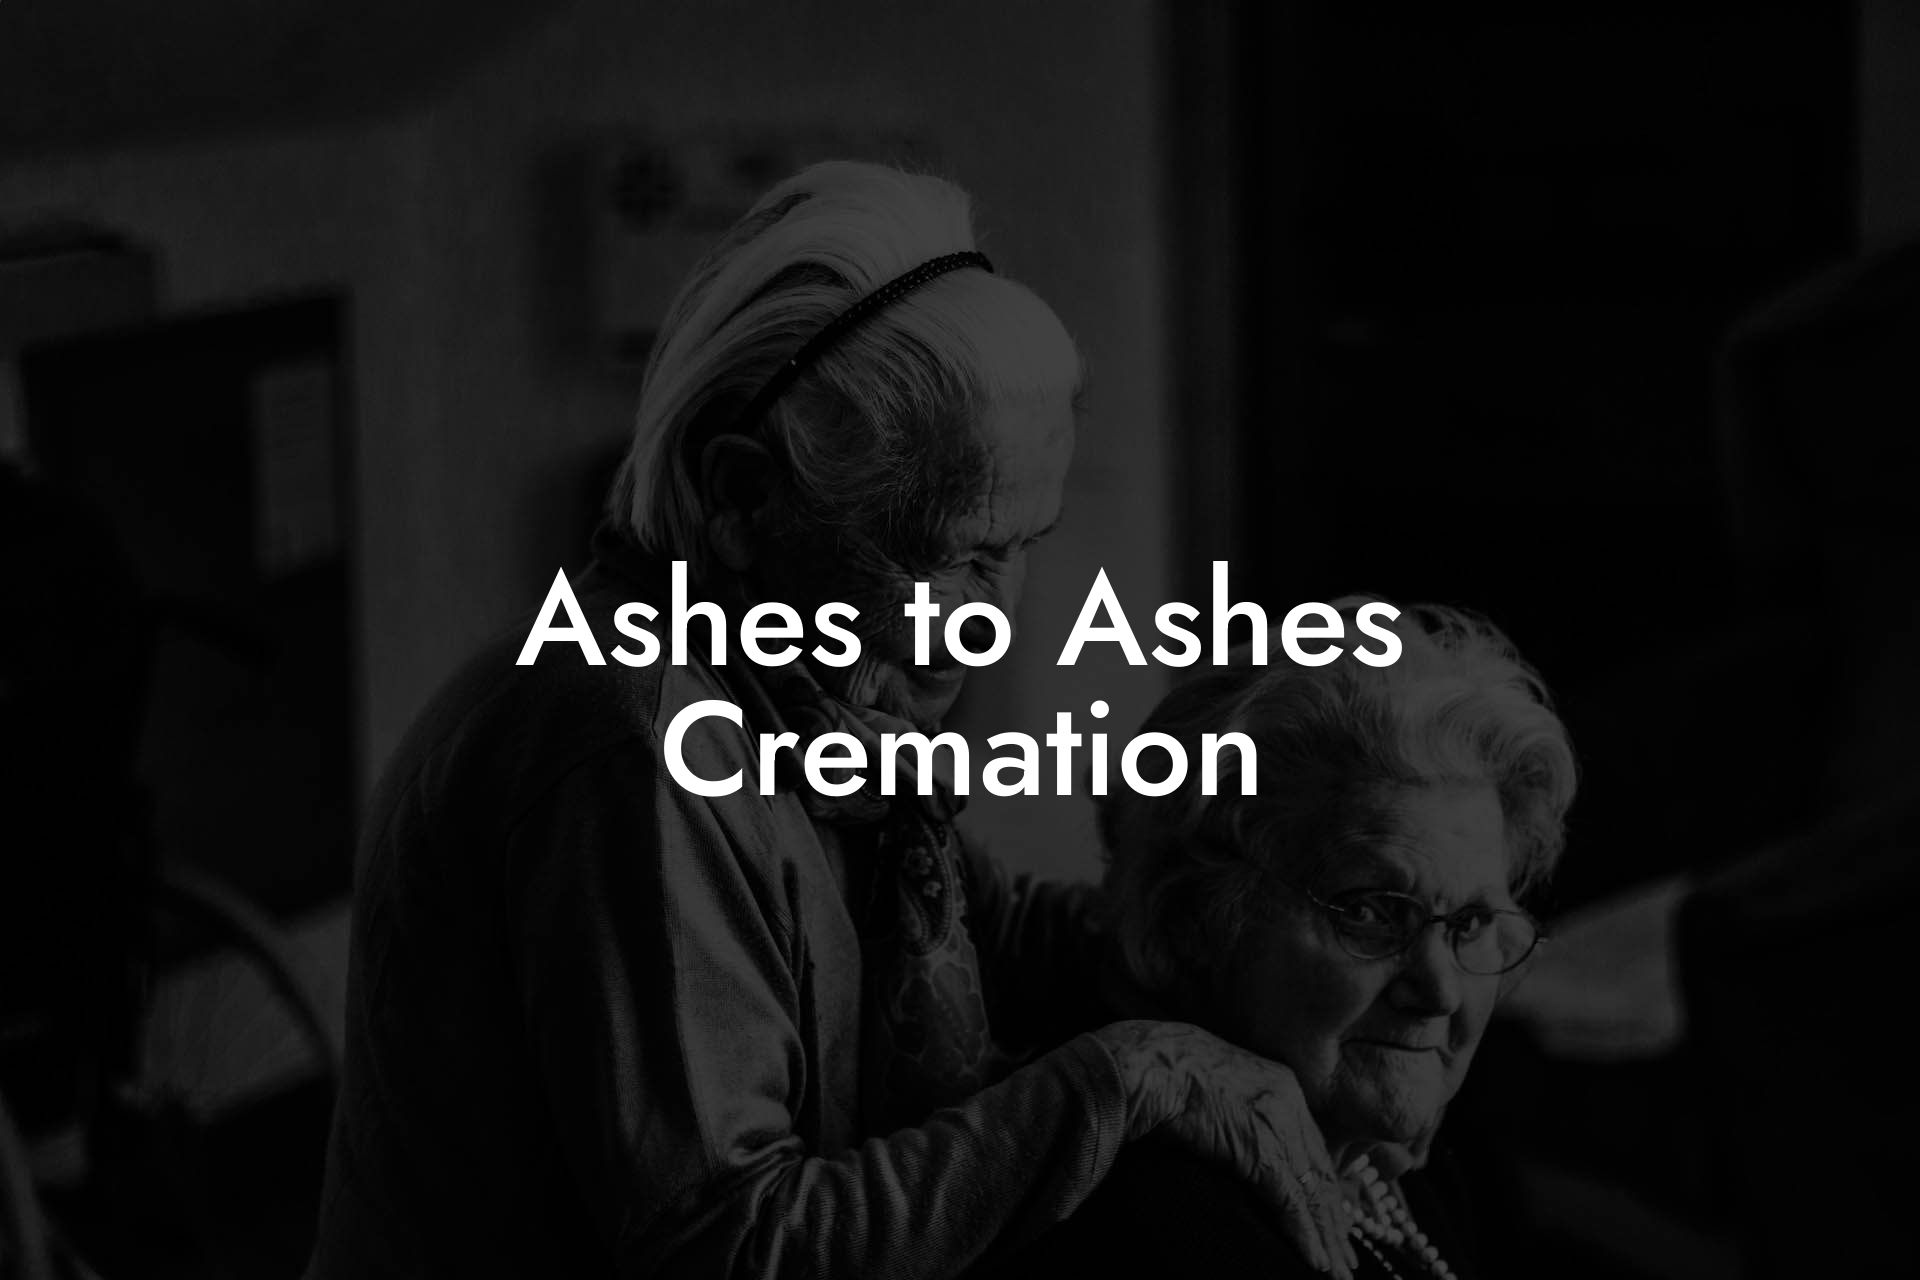 Ashes to Ashes Cremation